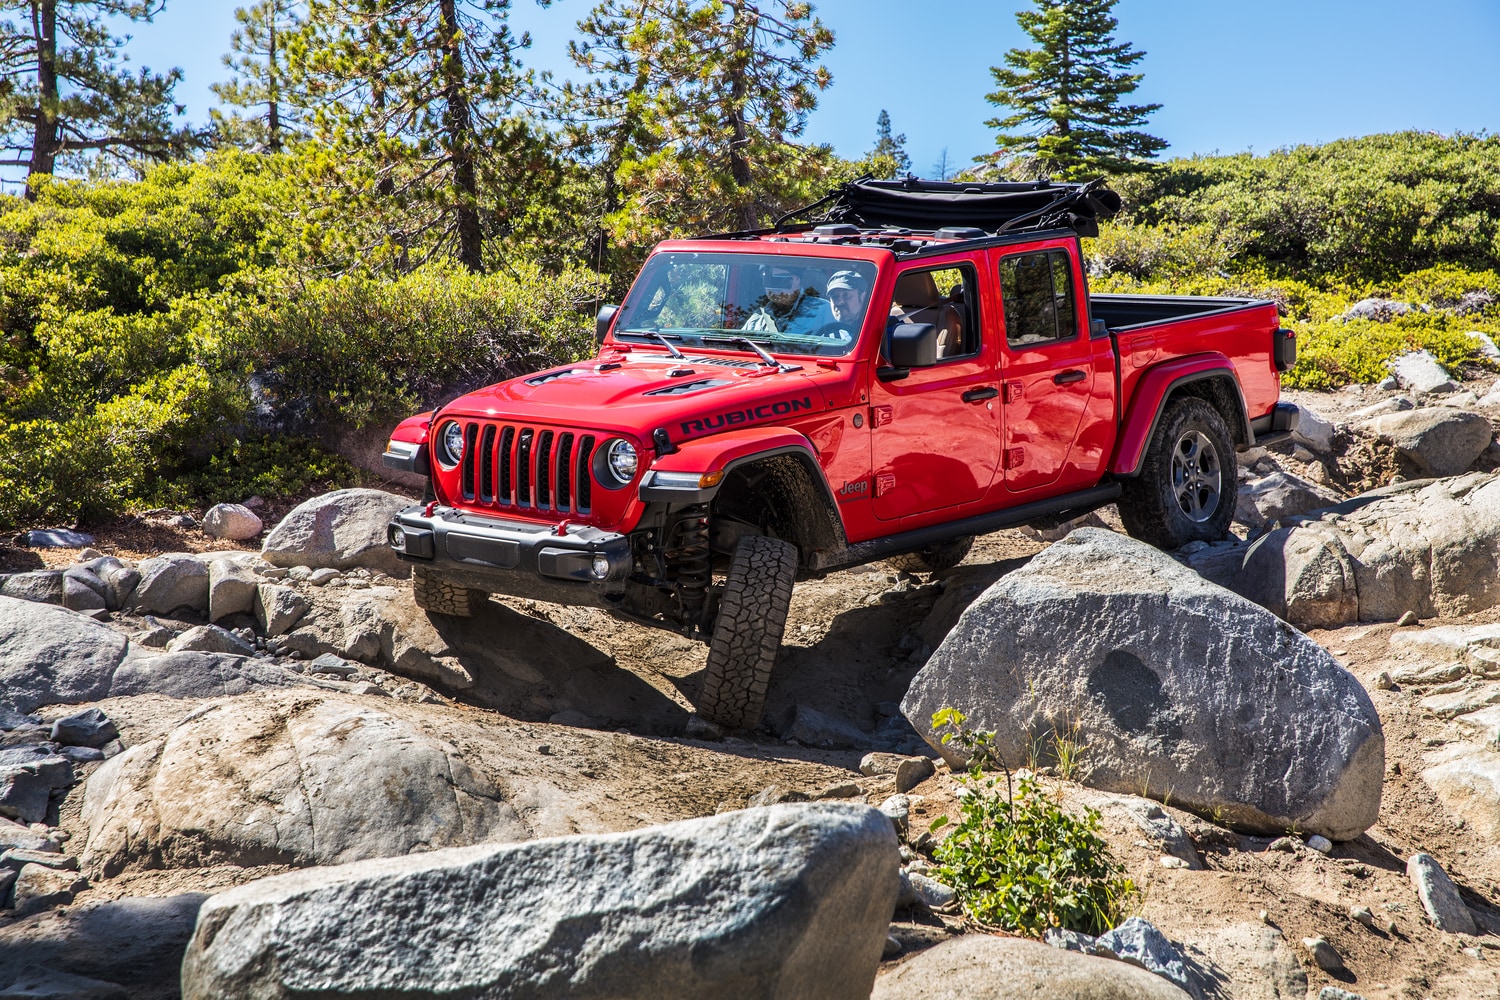 red Jeep Gladiator bouldering over rocks in a forest area